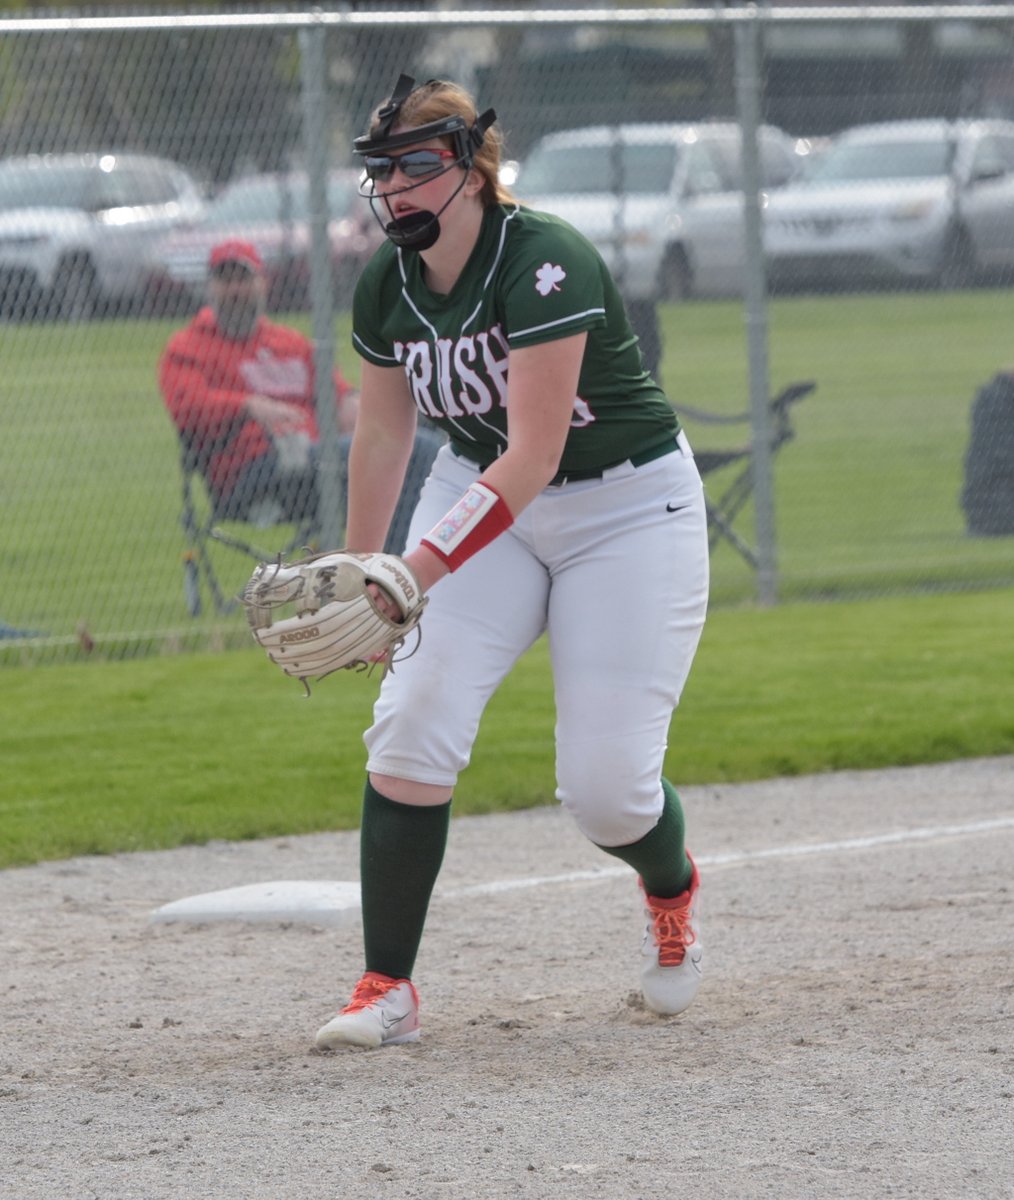 ☘️🥎 CONGRATS @KenzCole40 on being named to @CHSL1926 All-Catholic Team!!! Member of Cardinal Division Champion @IrishSoftball_, Makenzie hit .659 (54-for-82) with 38 RS, 14 doubles, 5 HRs, & 25 RBI ... GO IRISH!!! #CentralToLife ☘️🥎 Click HERE for Read Release ⬇️